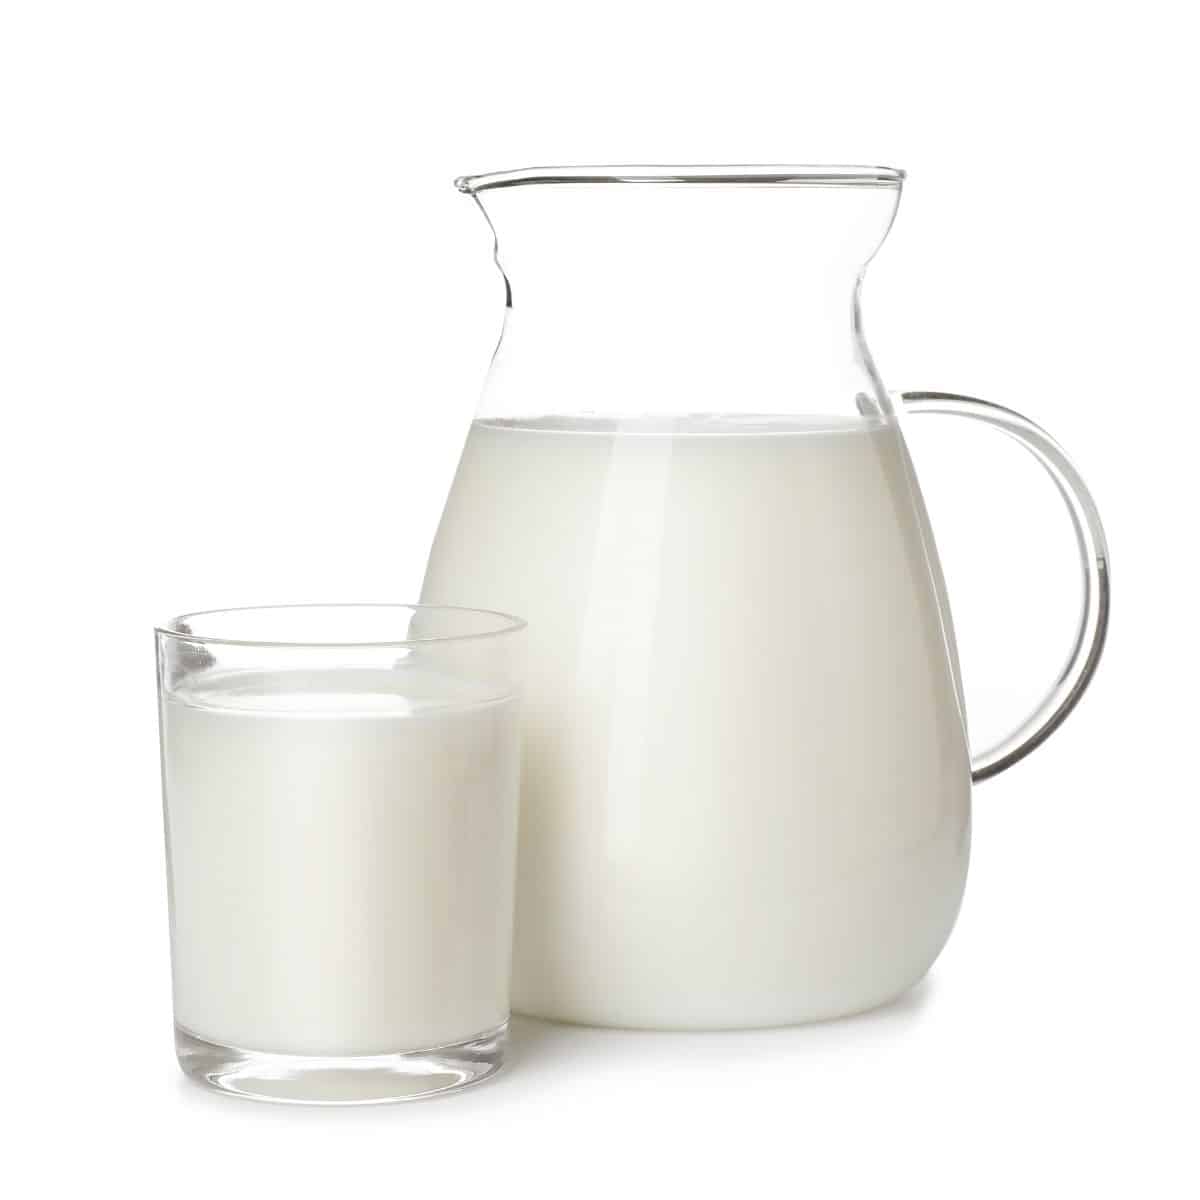 Whole milk in a cup and pitcher on a white background.